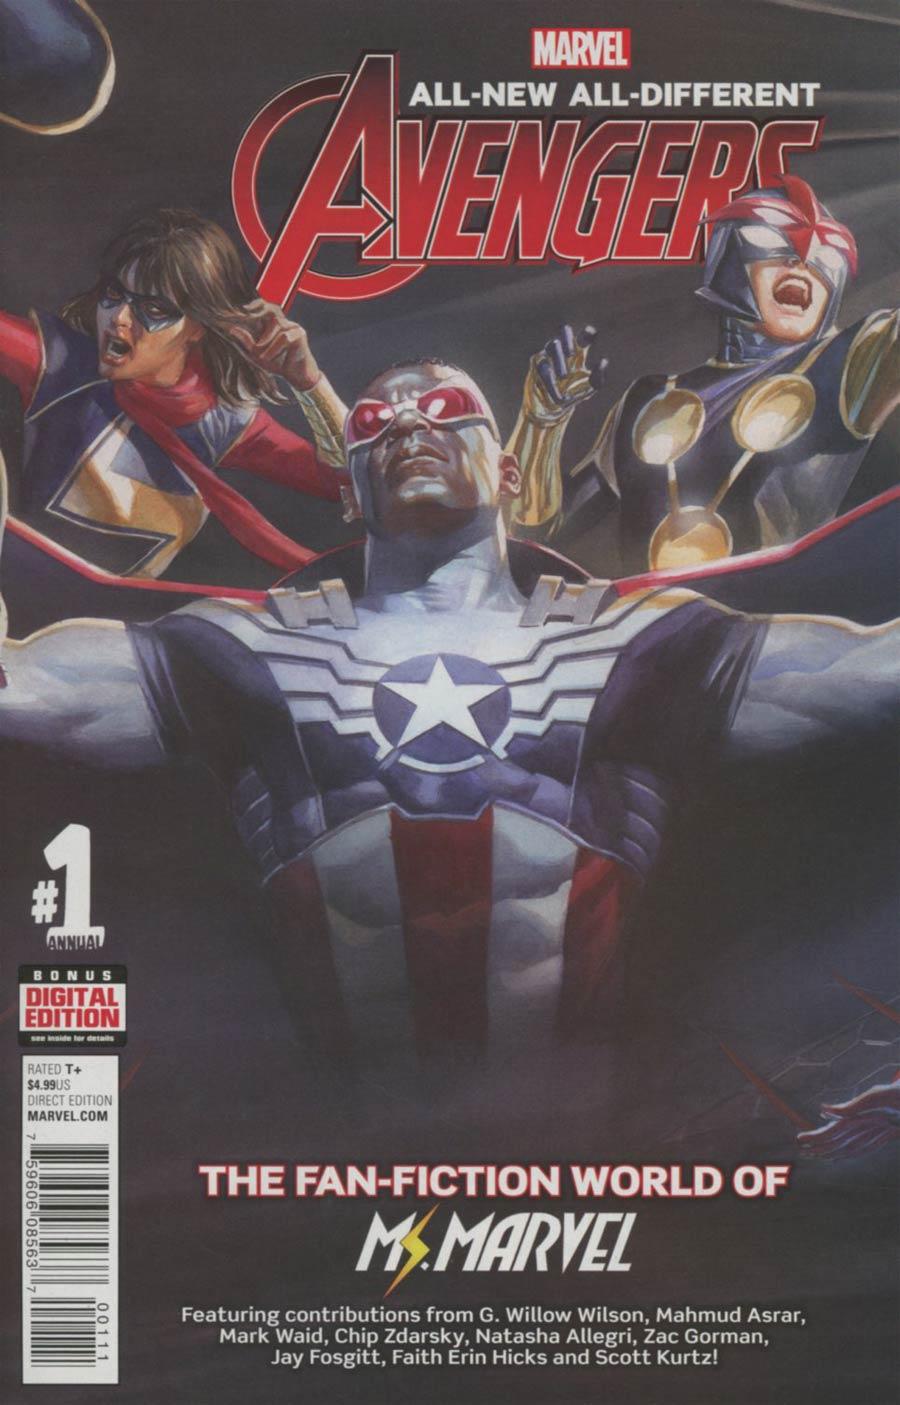 All-New All-Different Avengers Vol. 1 #1